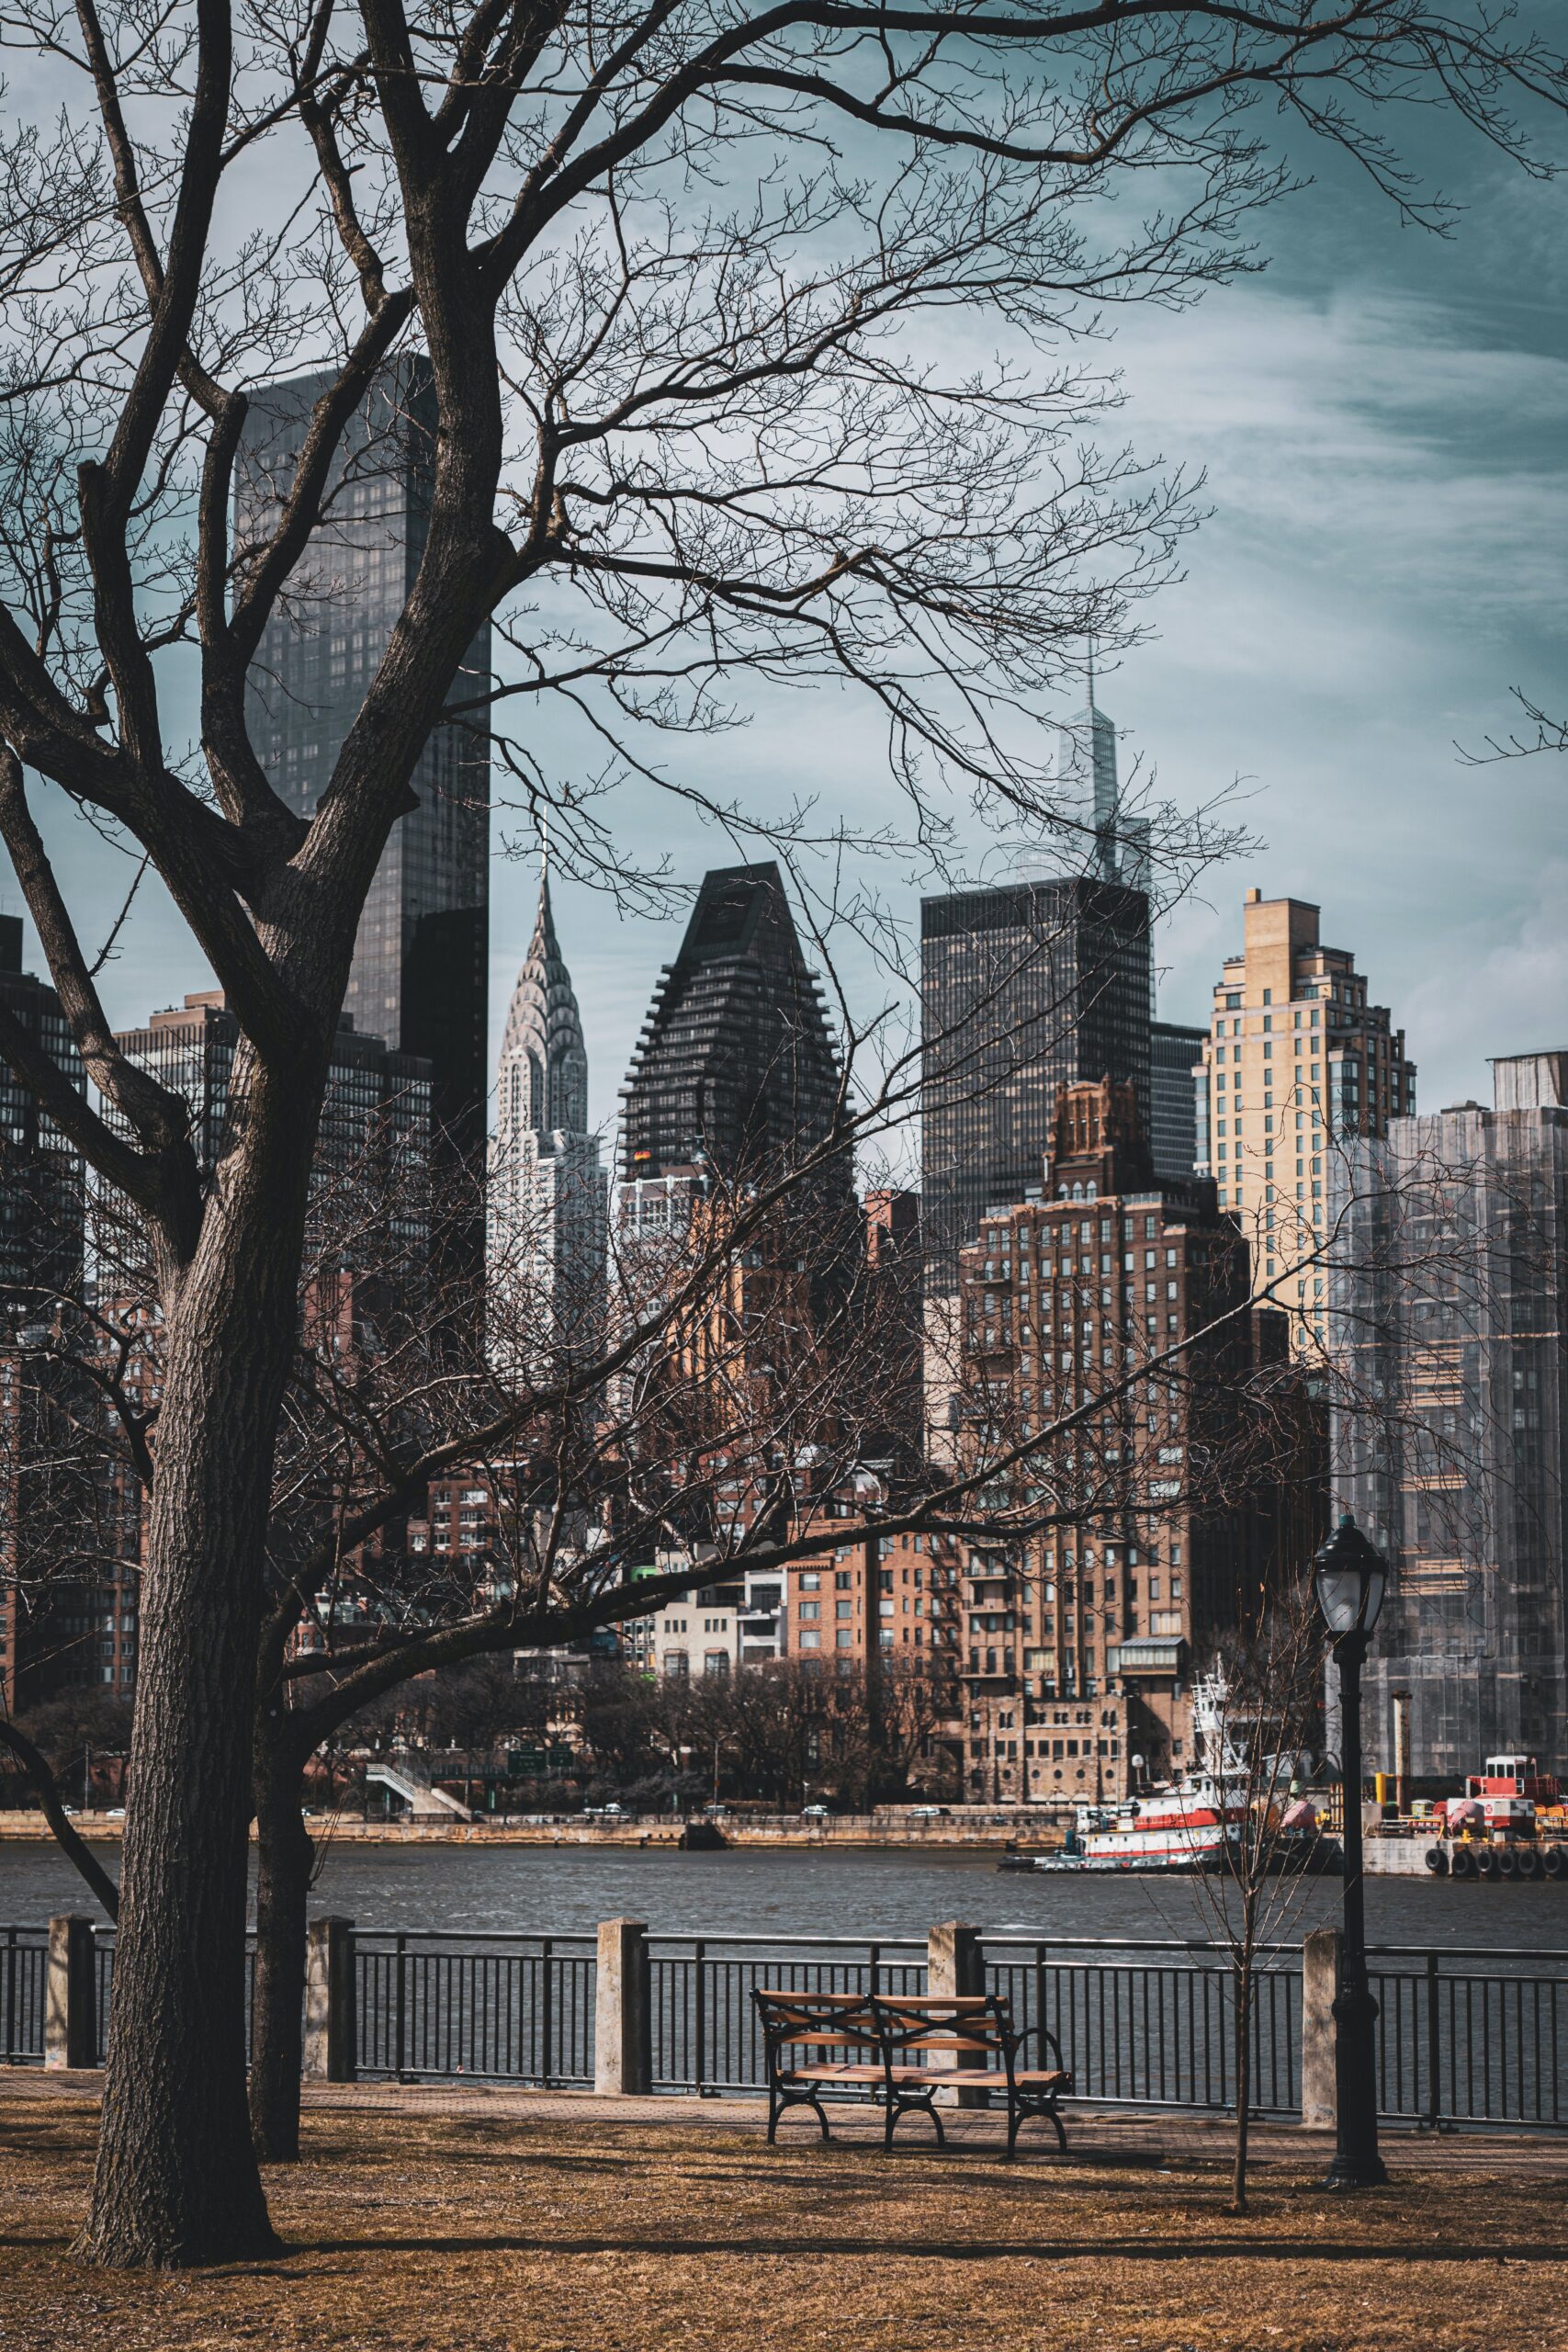 A view on Roosevelt Island, New York